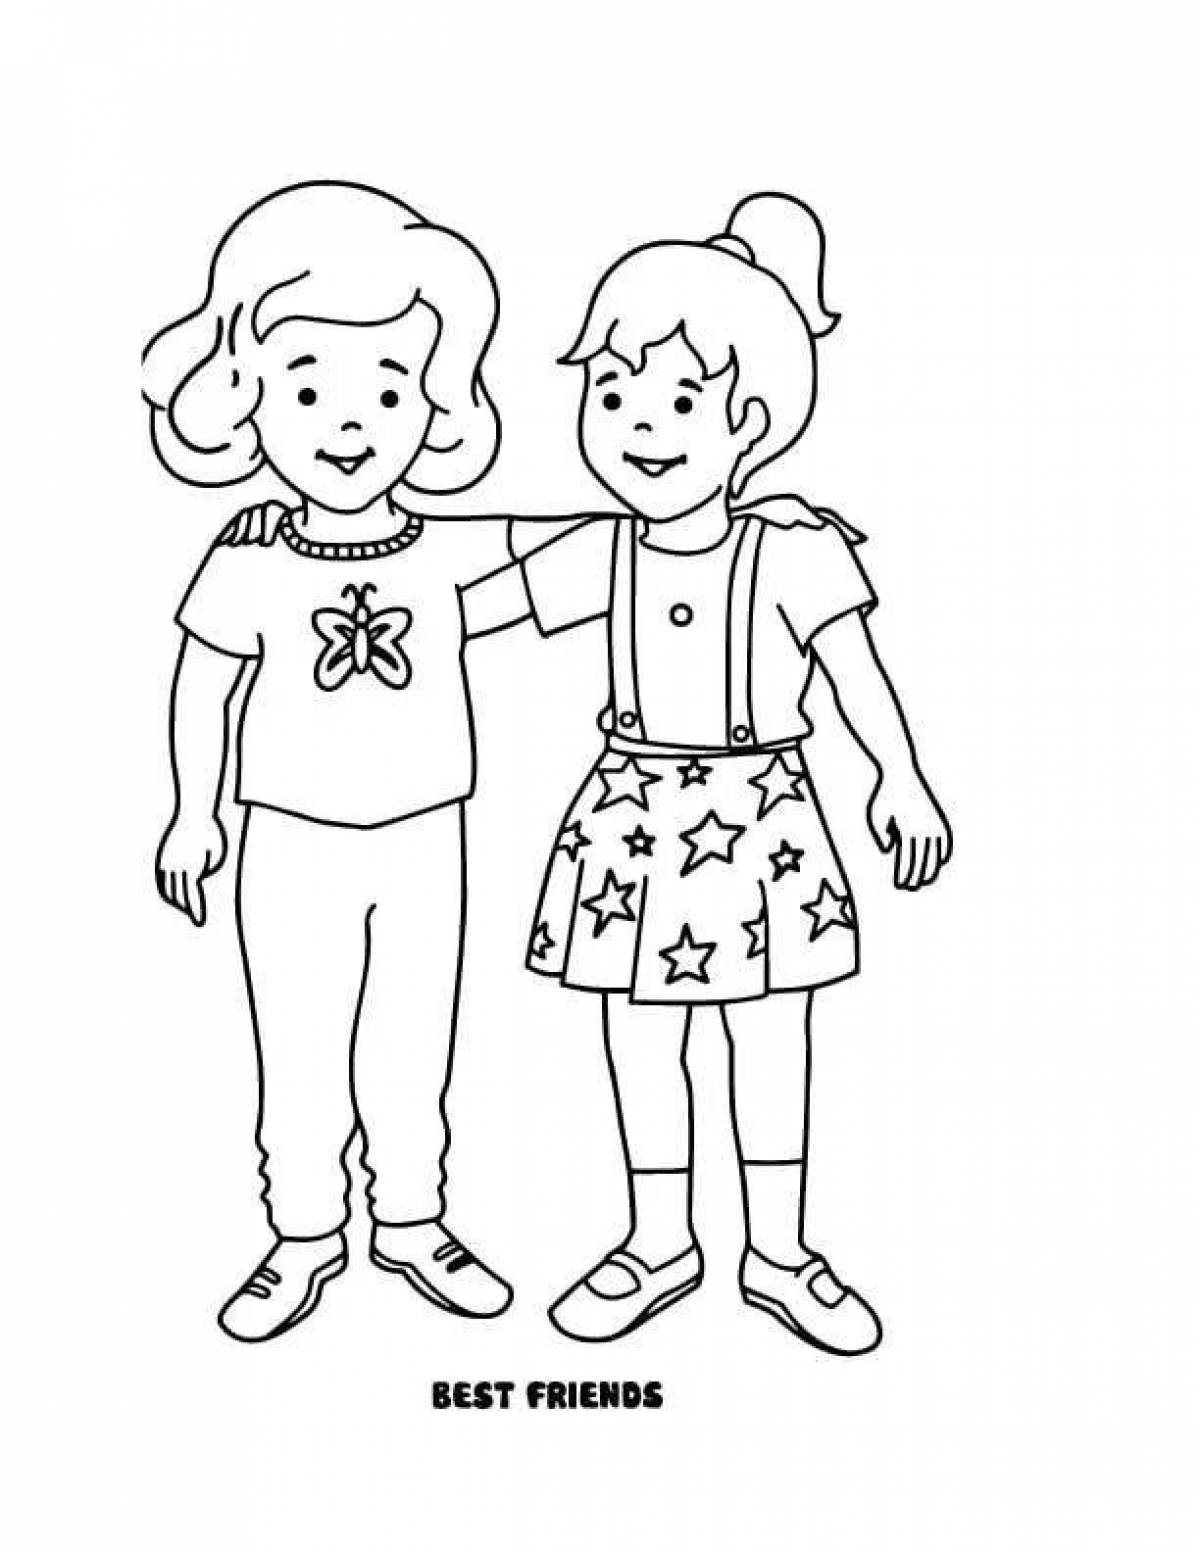 Colorful me and my friends coloring page